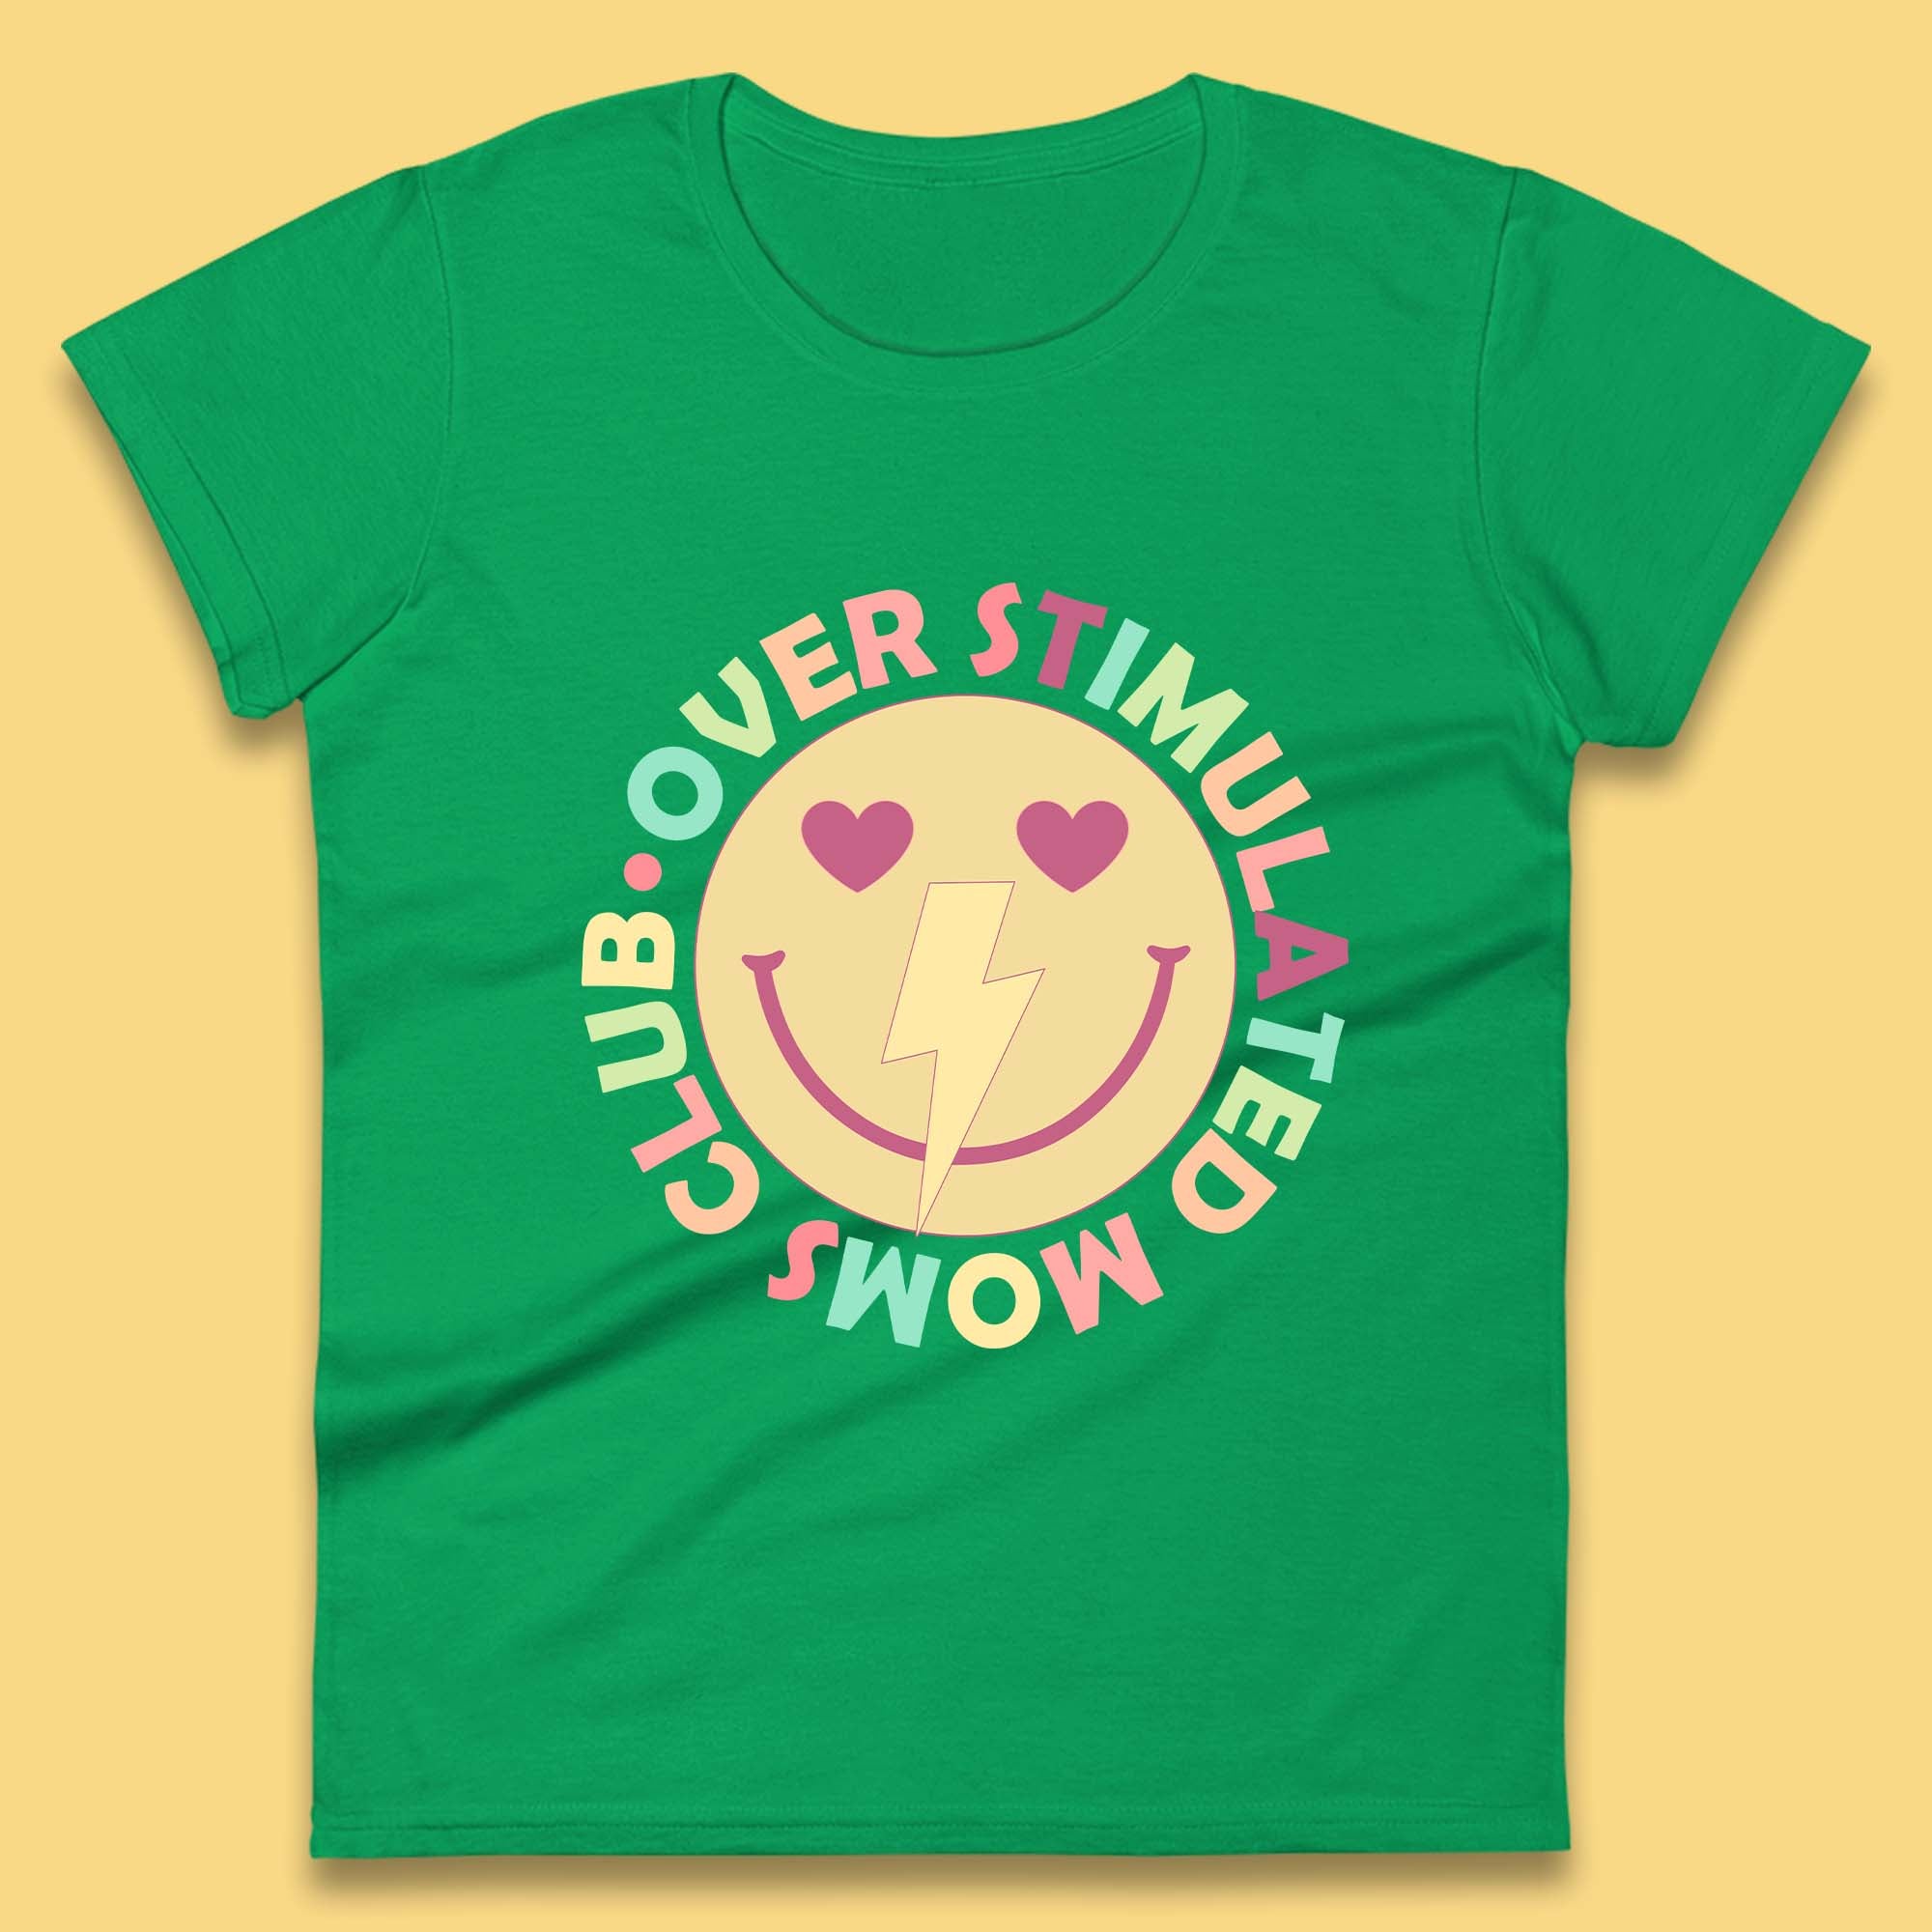 Over Stimulated Moms Club Womens T-Shirt